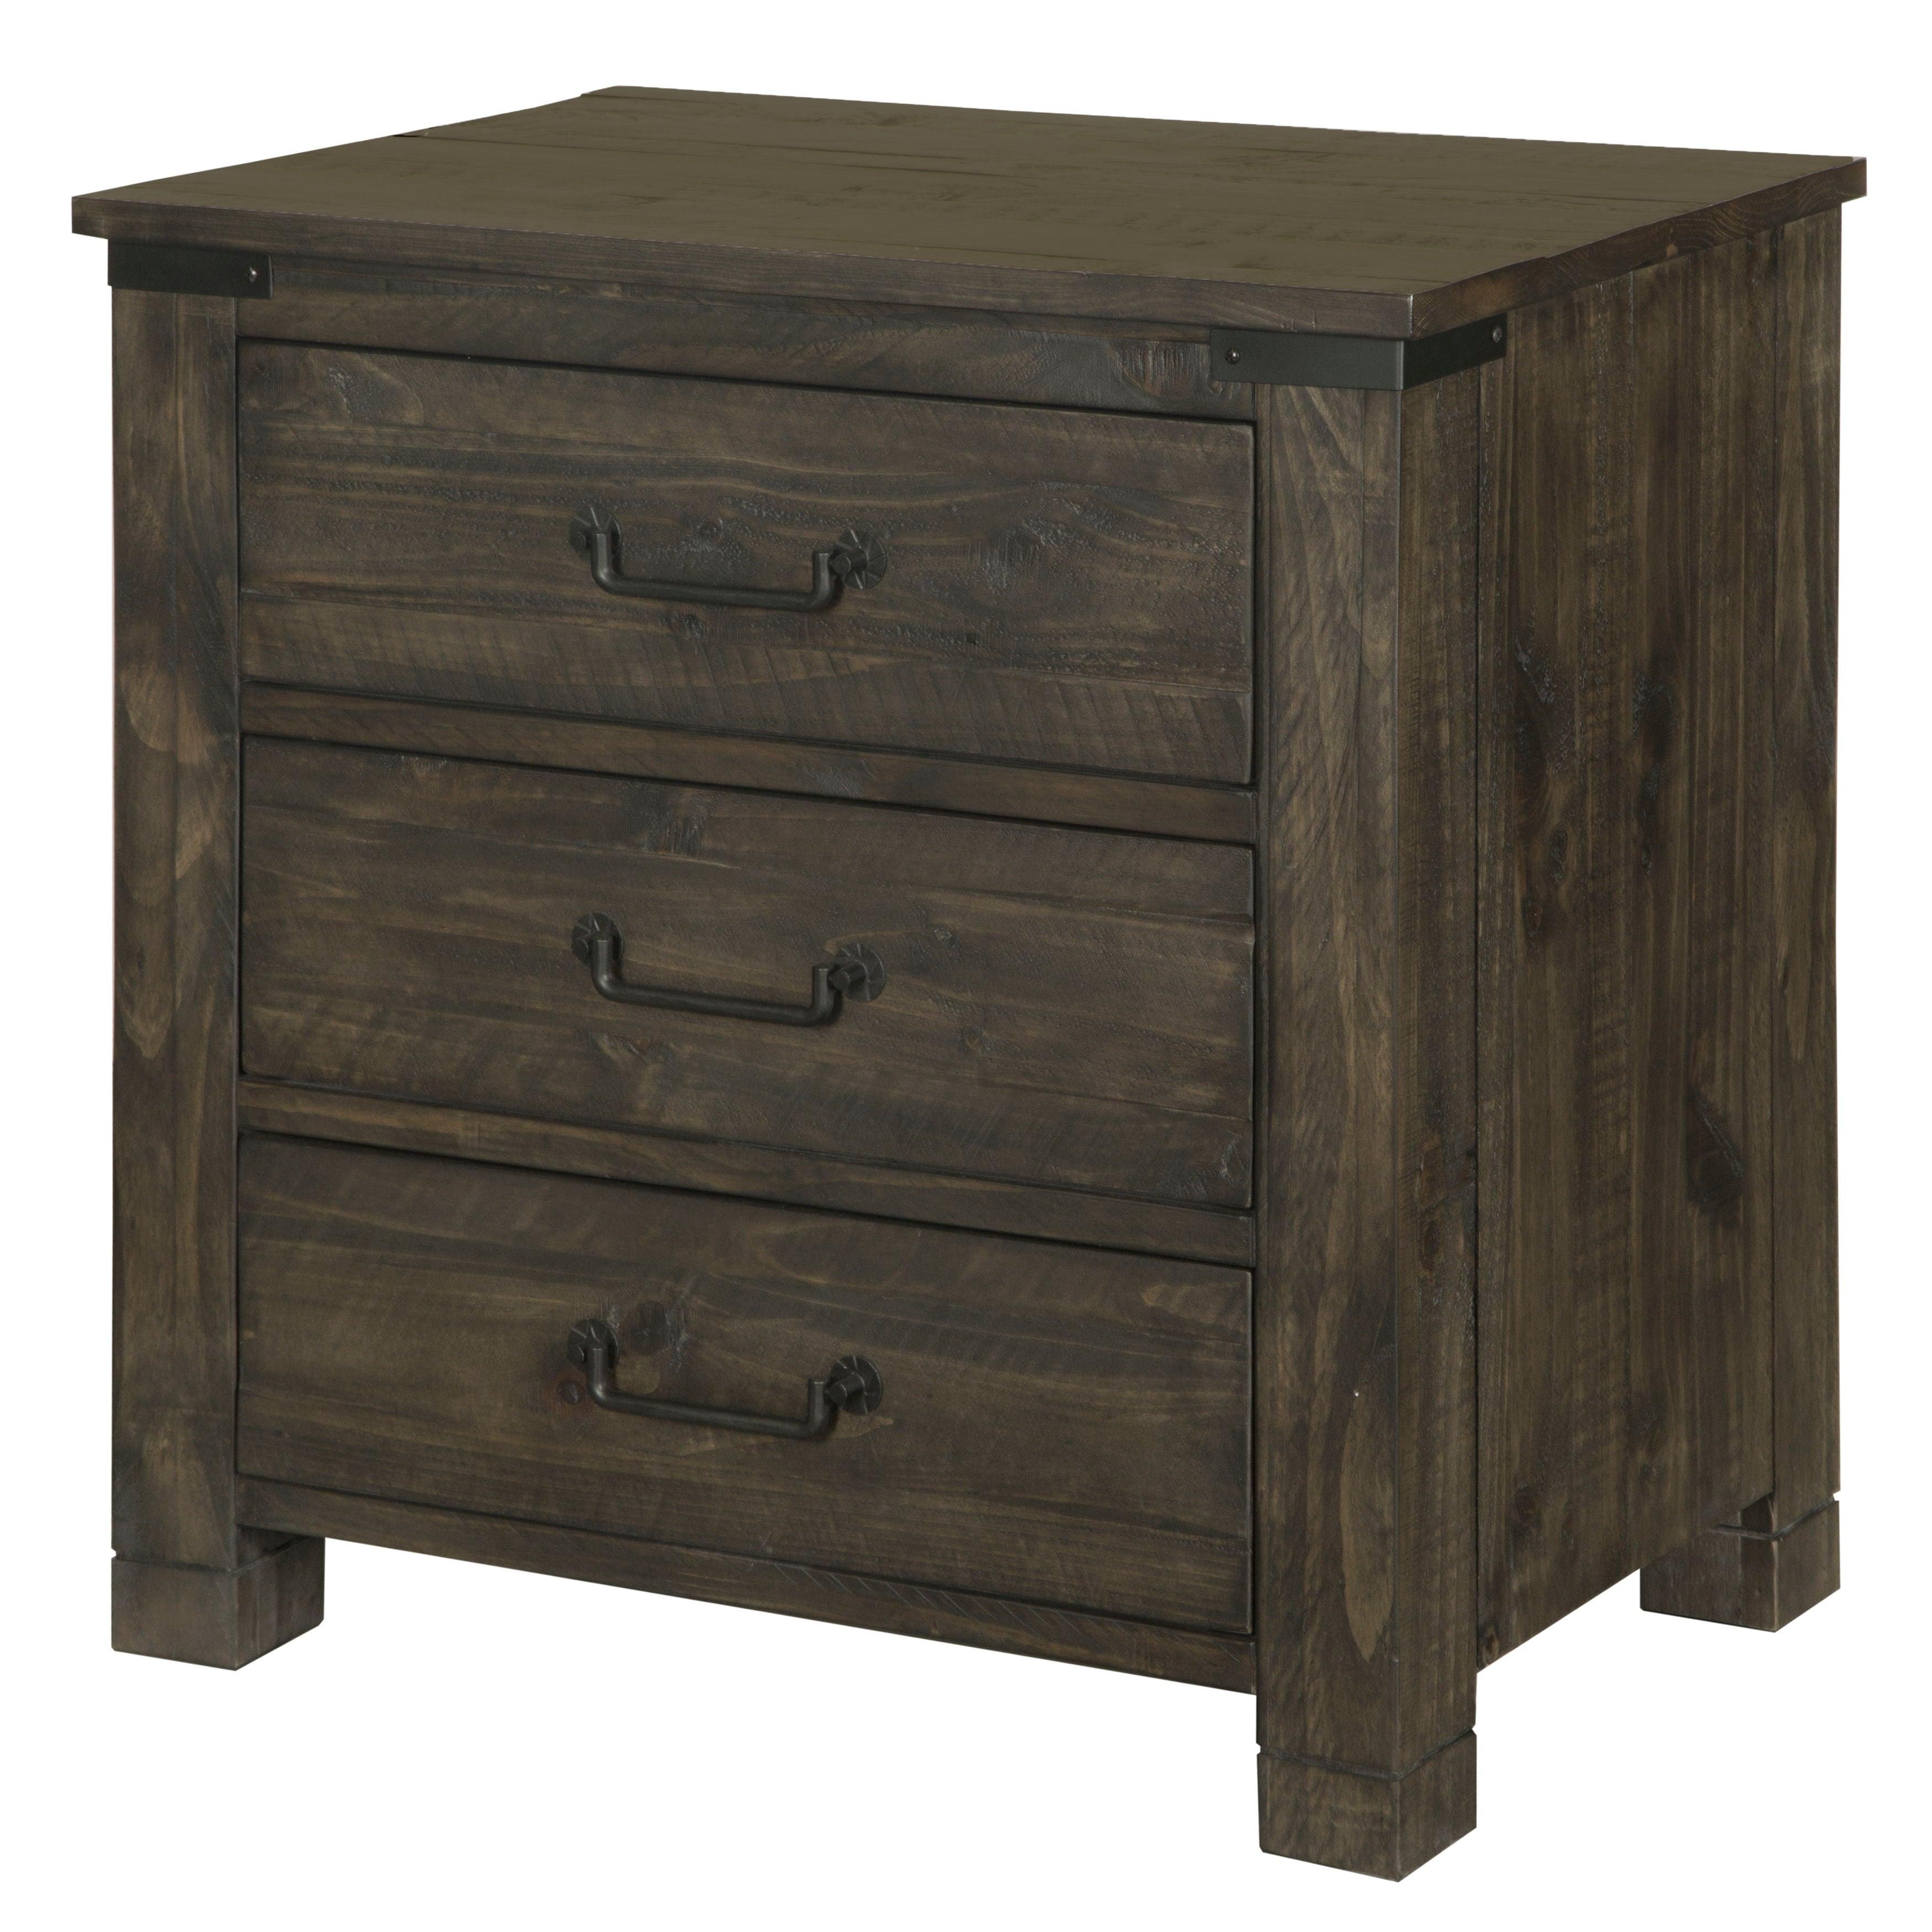 Magnussen Furniture - Abington - 3 Drawer Nightstand - Weathered Charcoal - 5th Avenue Furniture